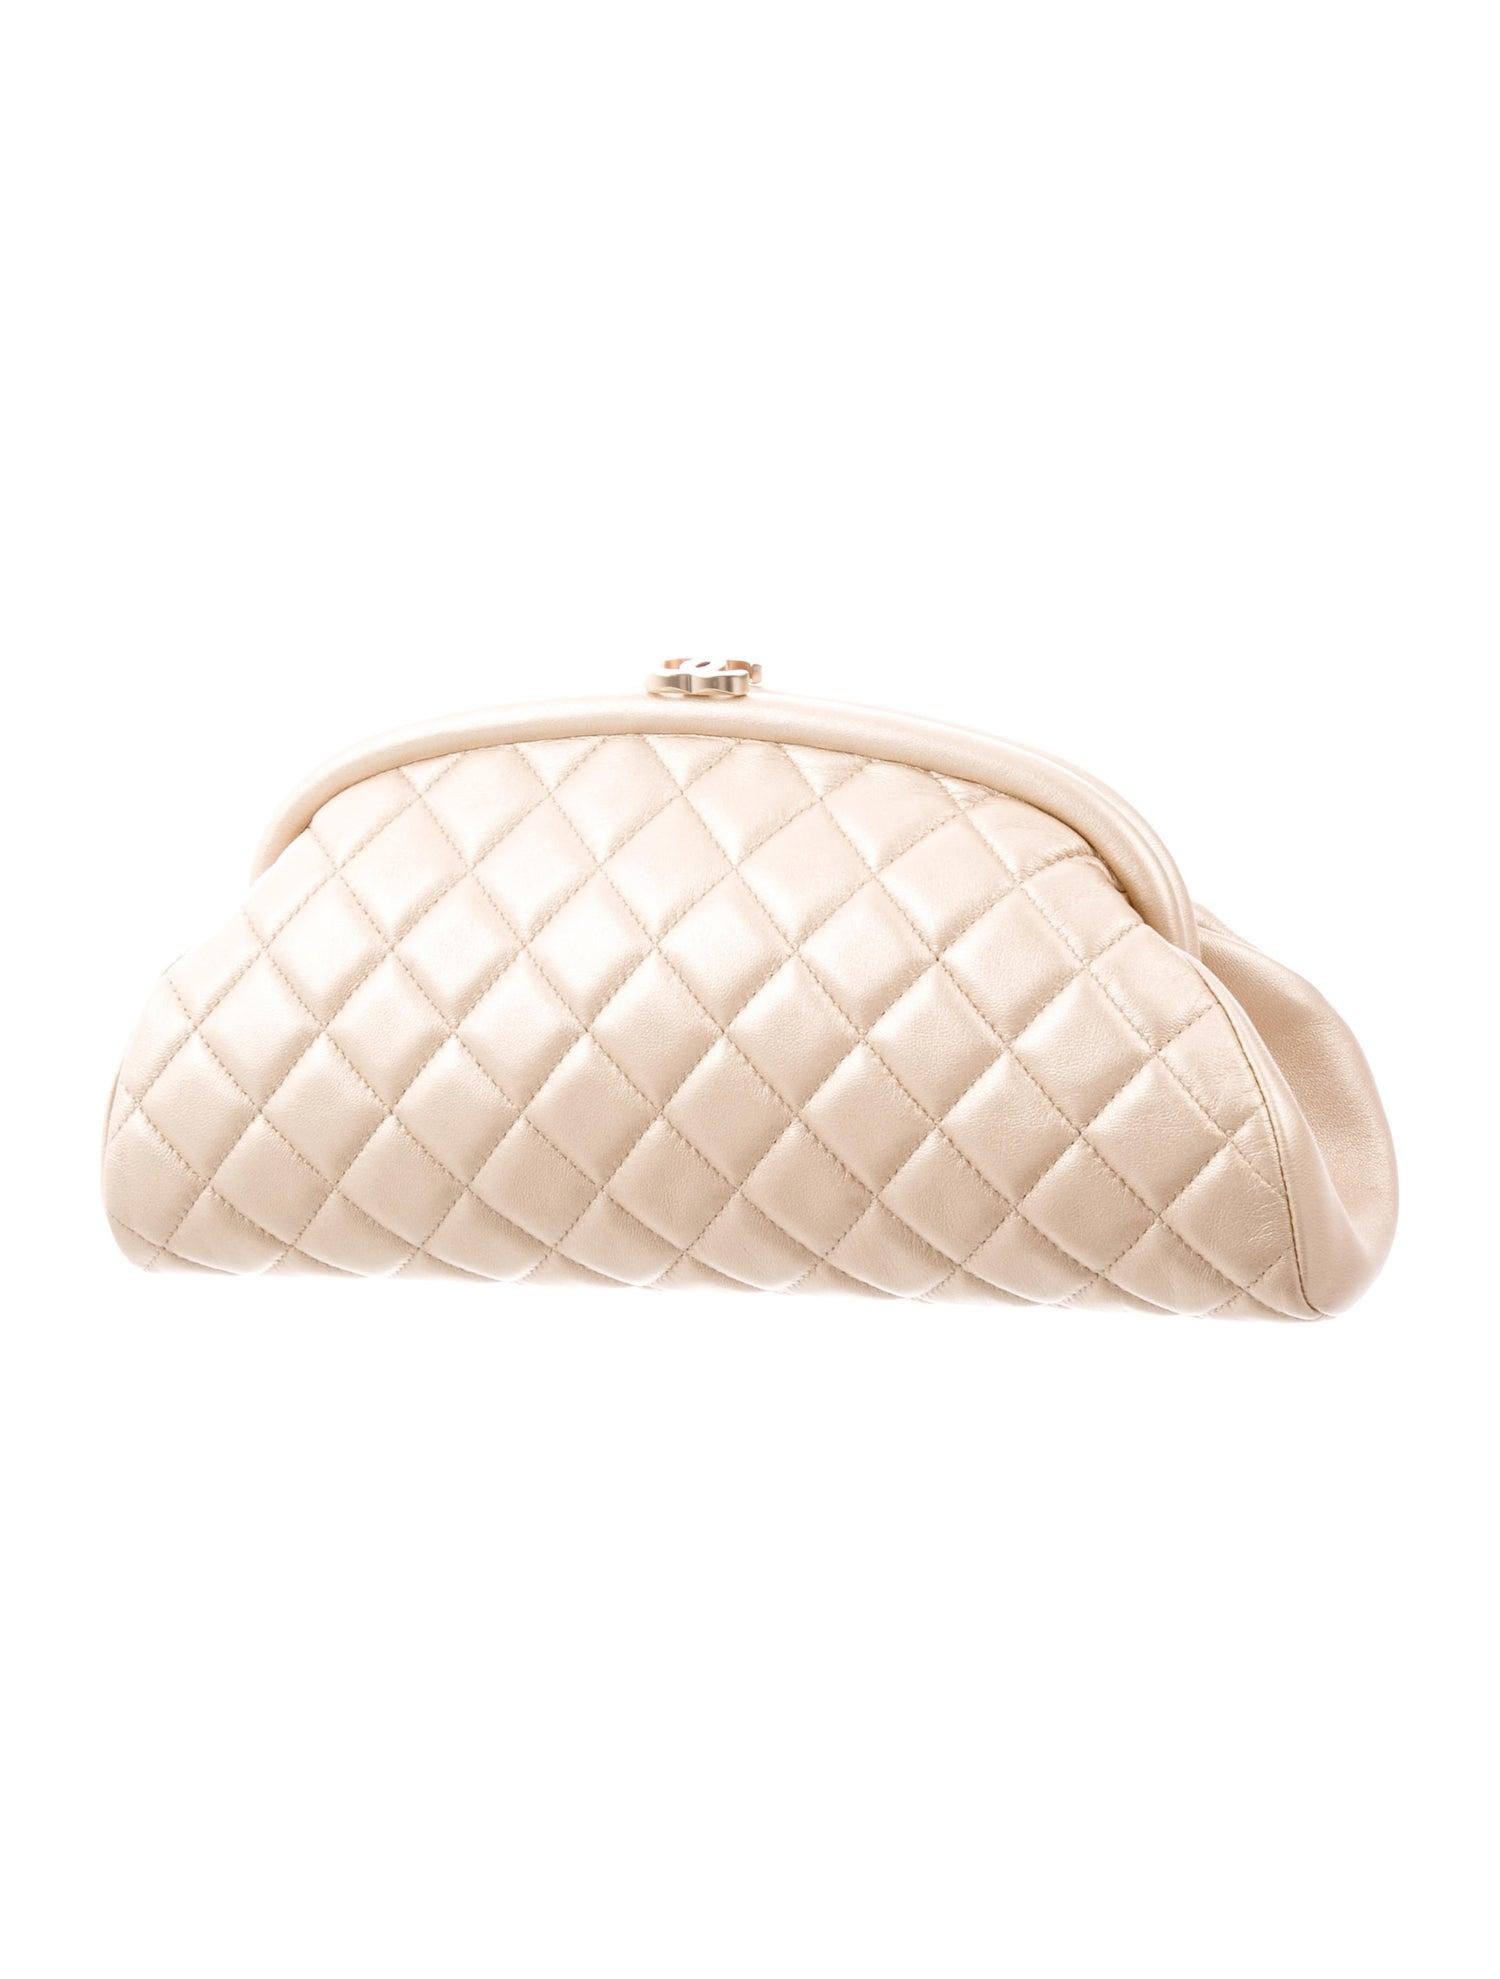 Chanel NEW Light Gold Nude Leather Evening Envelope Clutch Bag in Box

Leather 
Gold-tone hardware
Leather lining
Push-lock closure
Made in Italy
Measures 10.5